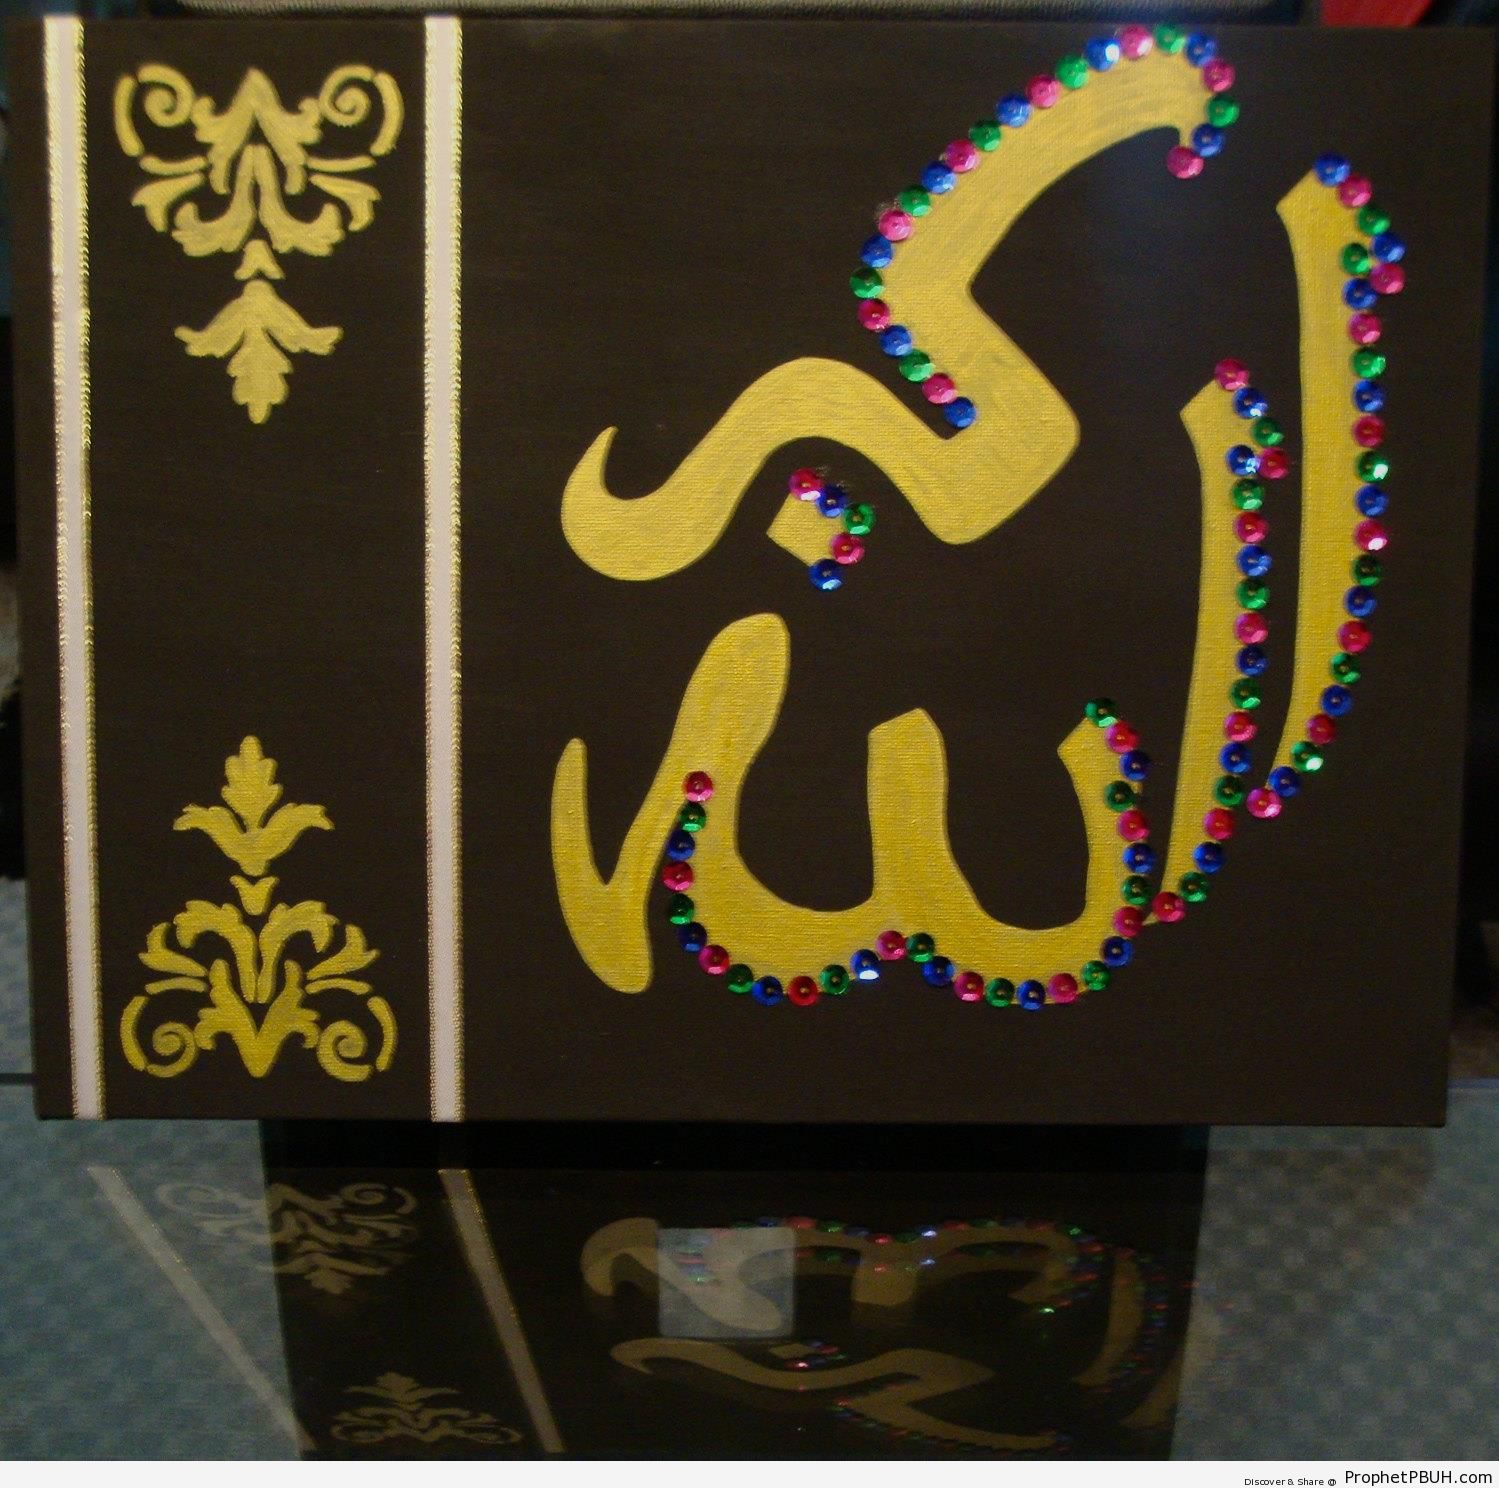 Embellished Allahu Akbar (-God is Great-) in Acrylic Paint - Allahu Akbar Calligraphy and Typography 